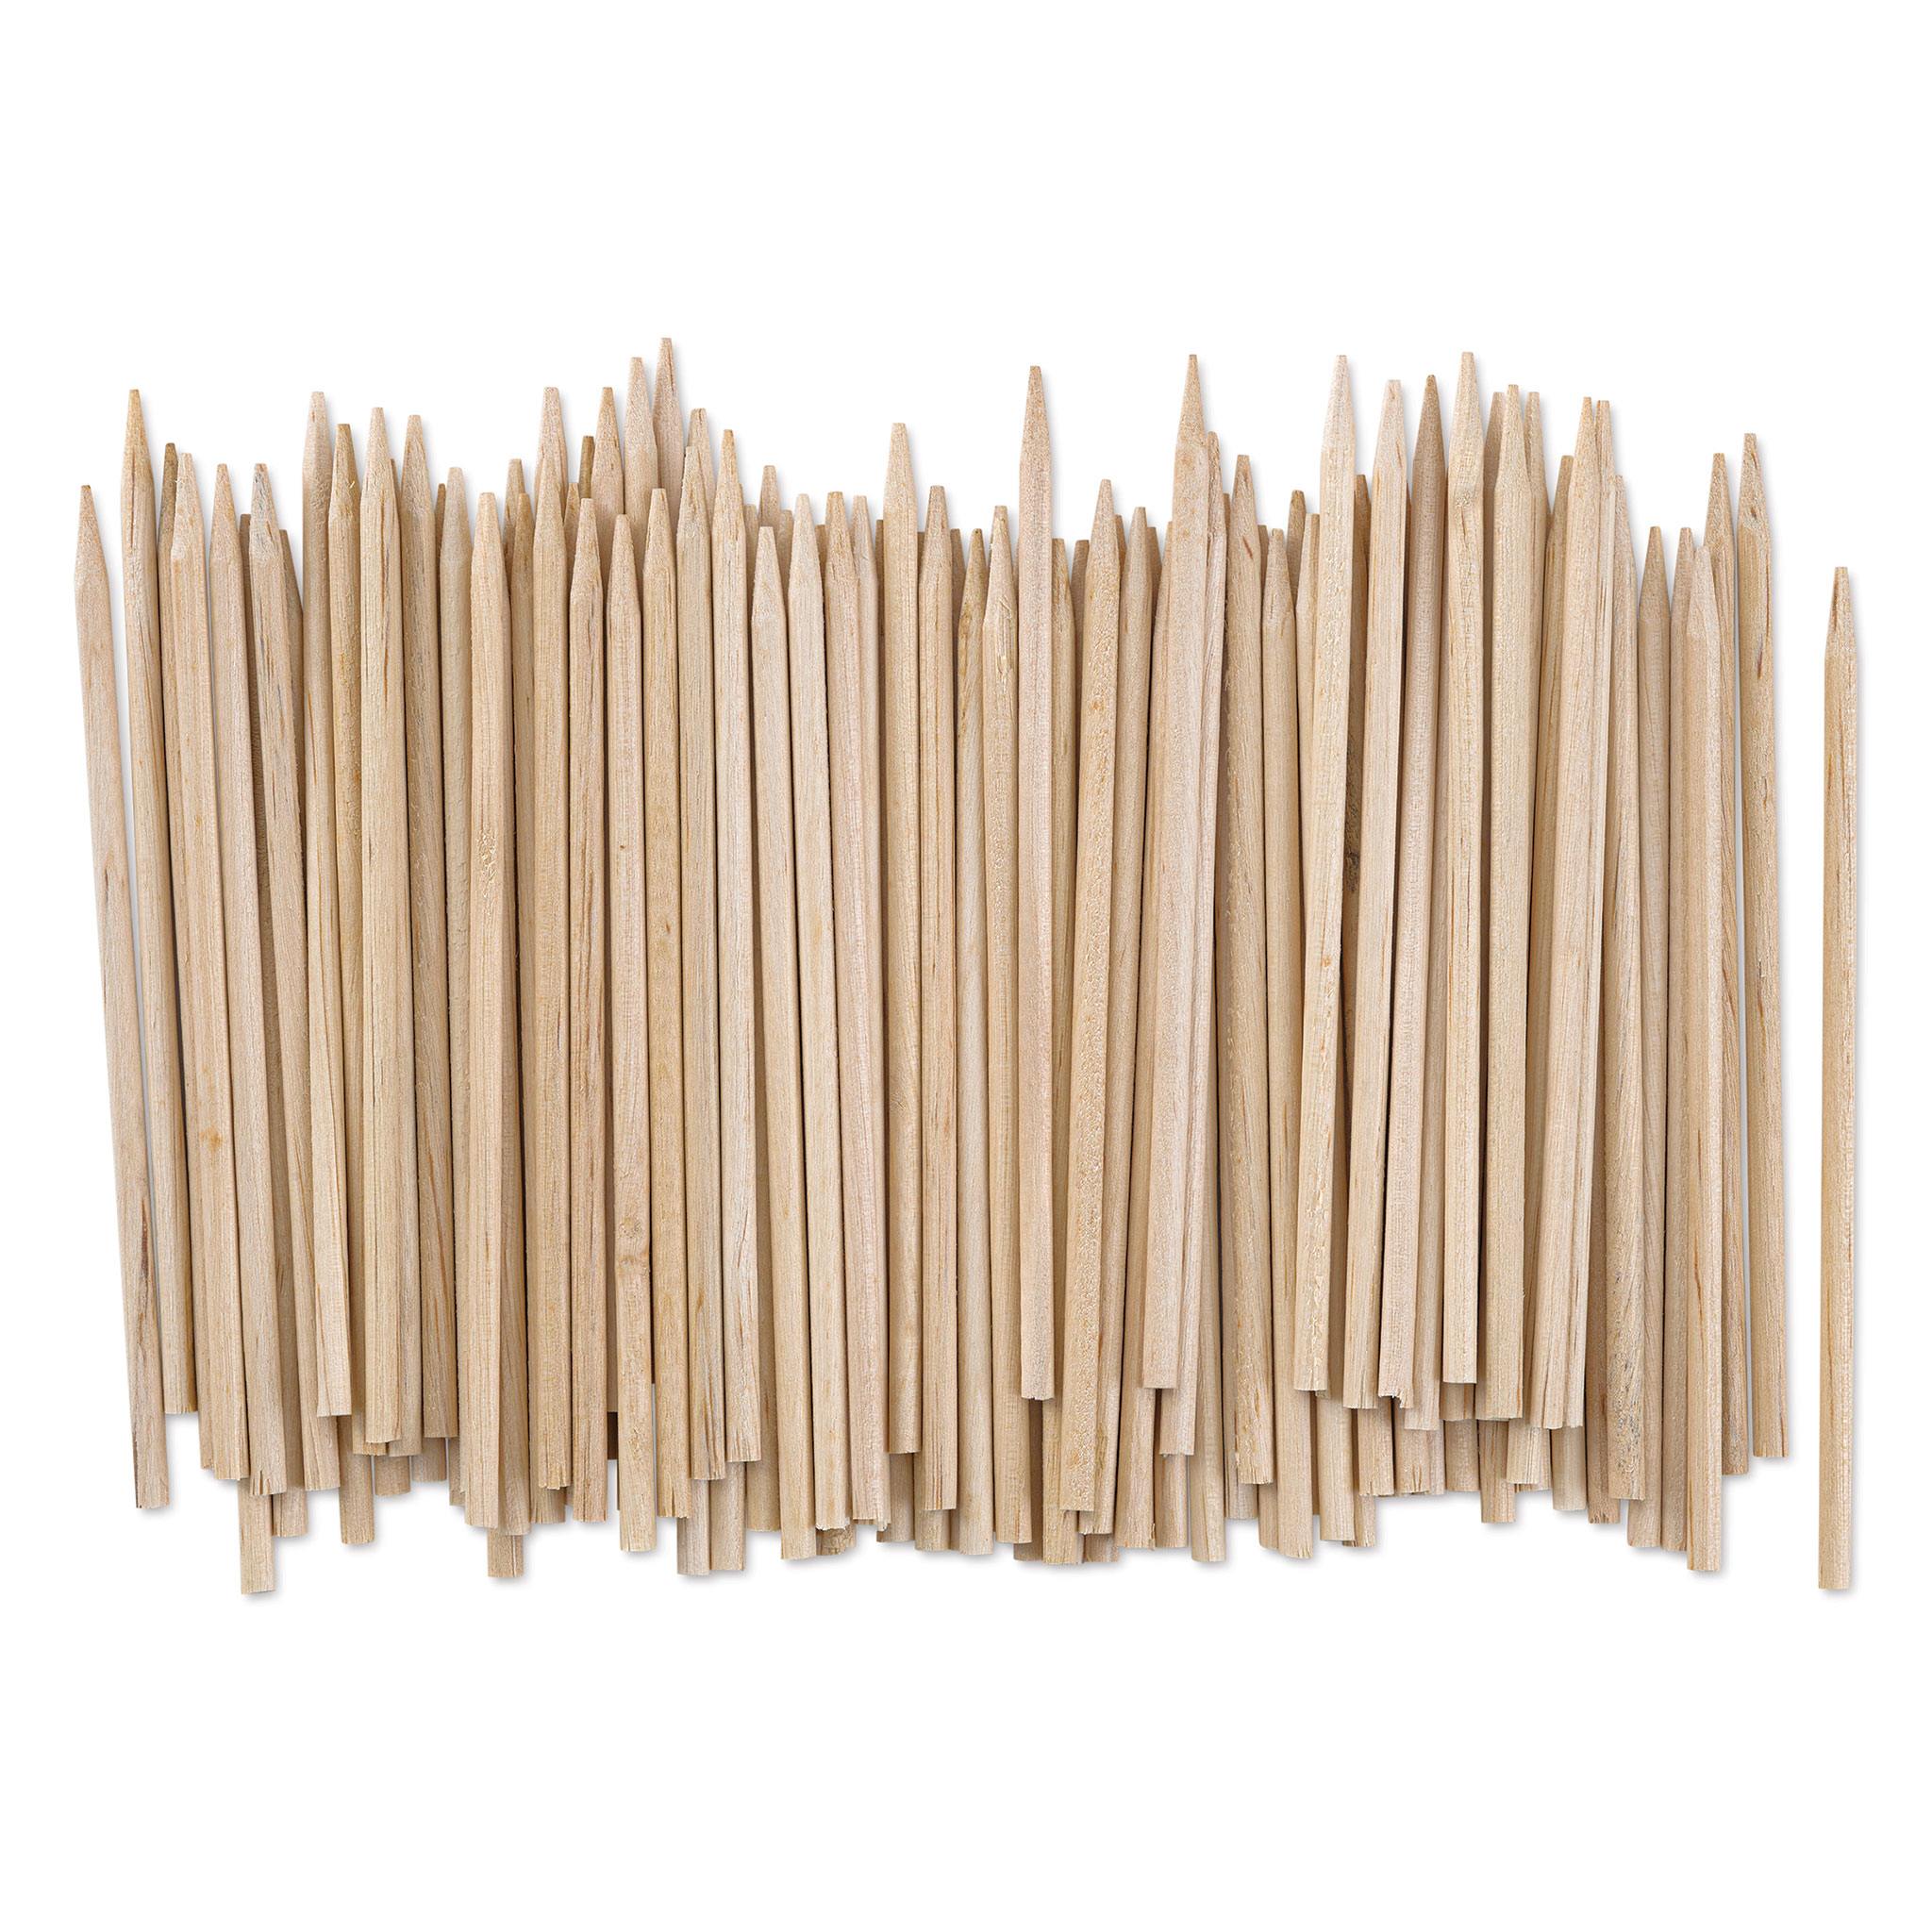 hand2mind Jumbo Size Natural Wood Craft Sticks, Popsicle Sticks for Crafts, Waxi